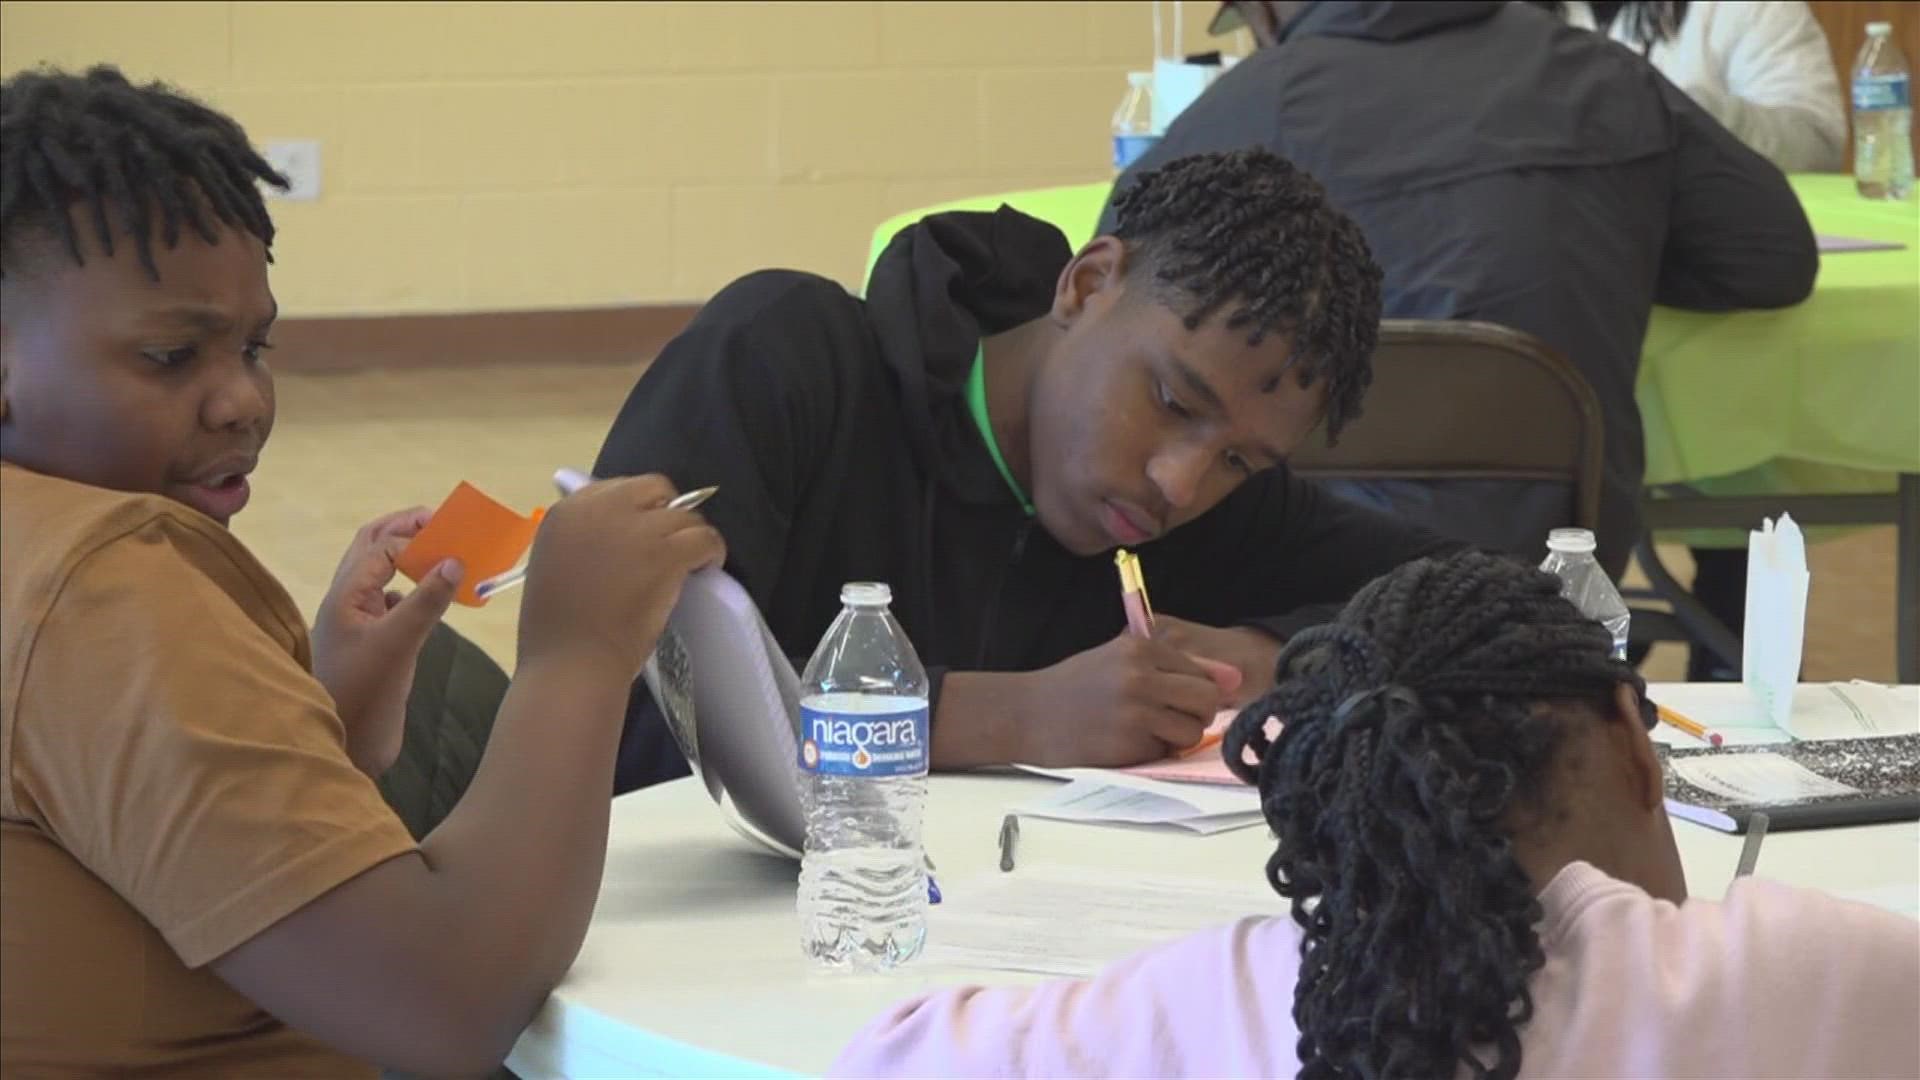 A local non-profit association that offers free counseling to start-up businesses held their first youth workshop on Saturday.